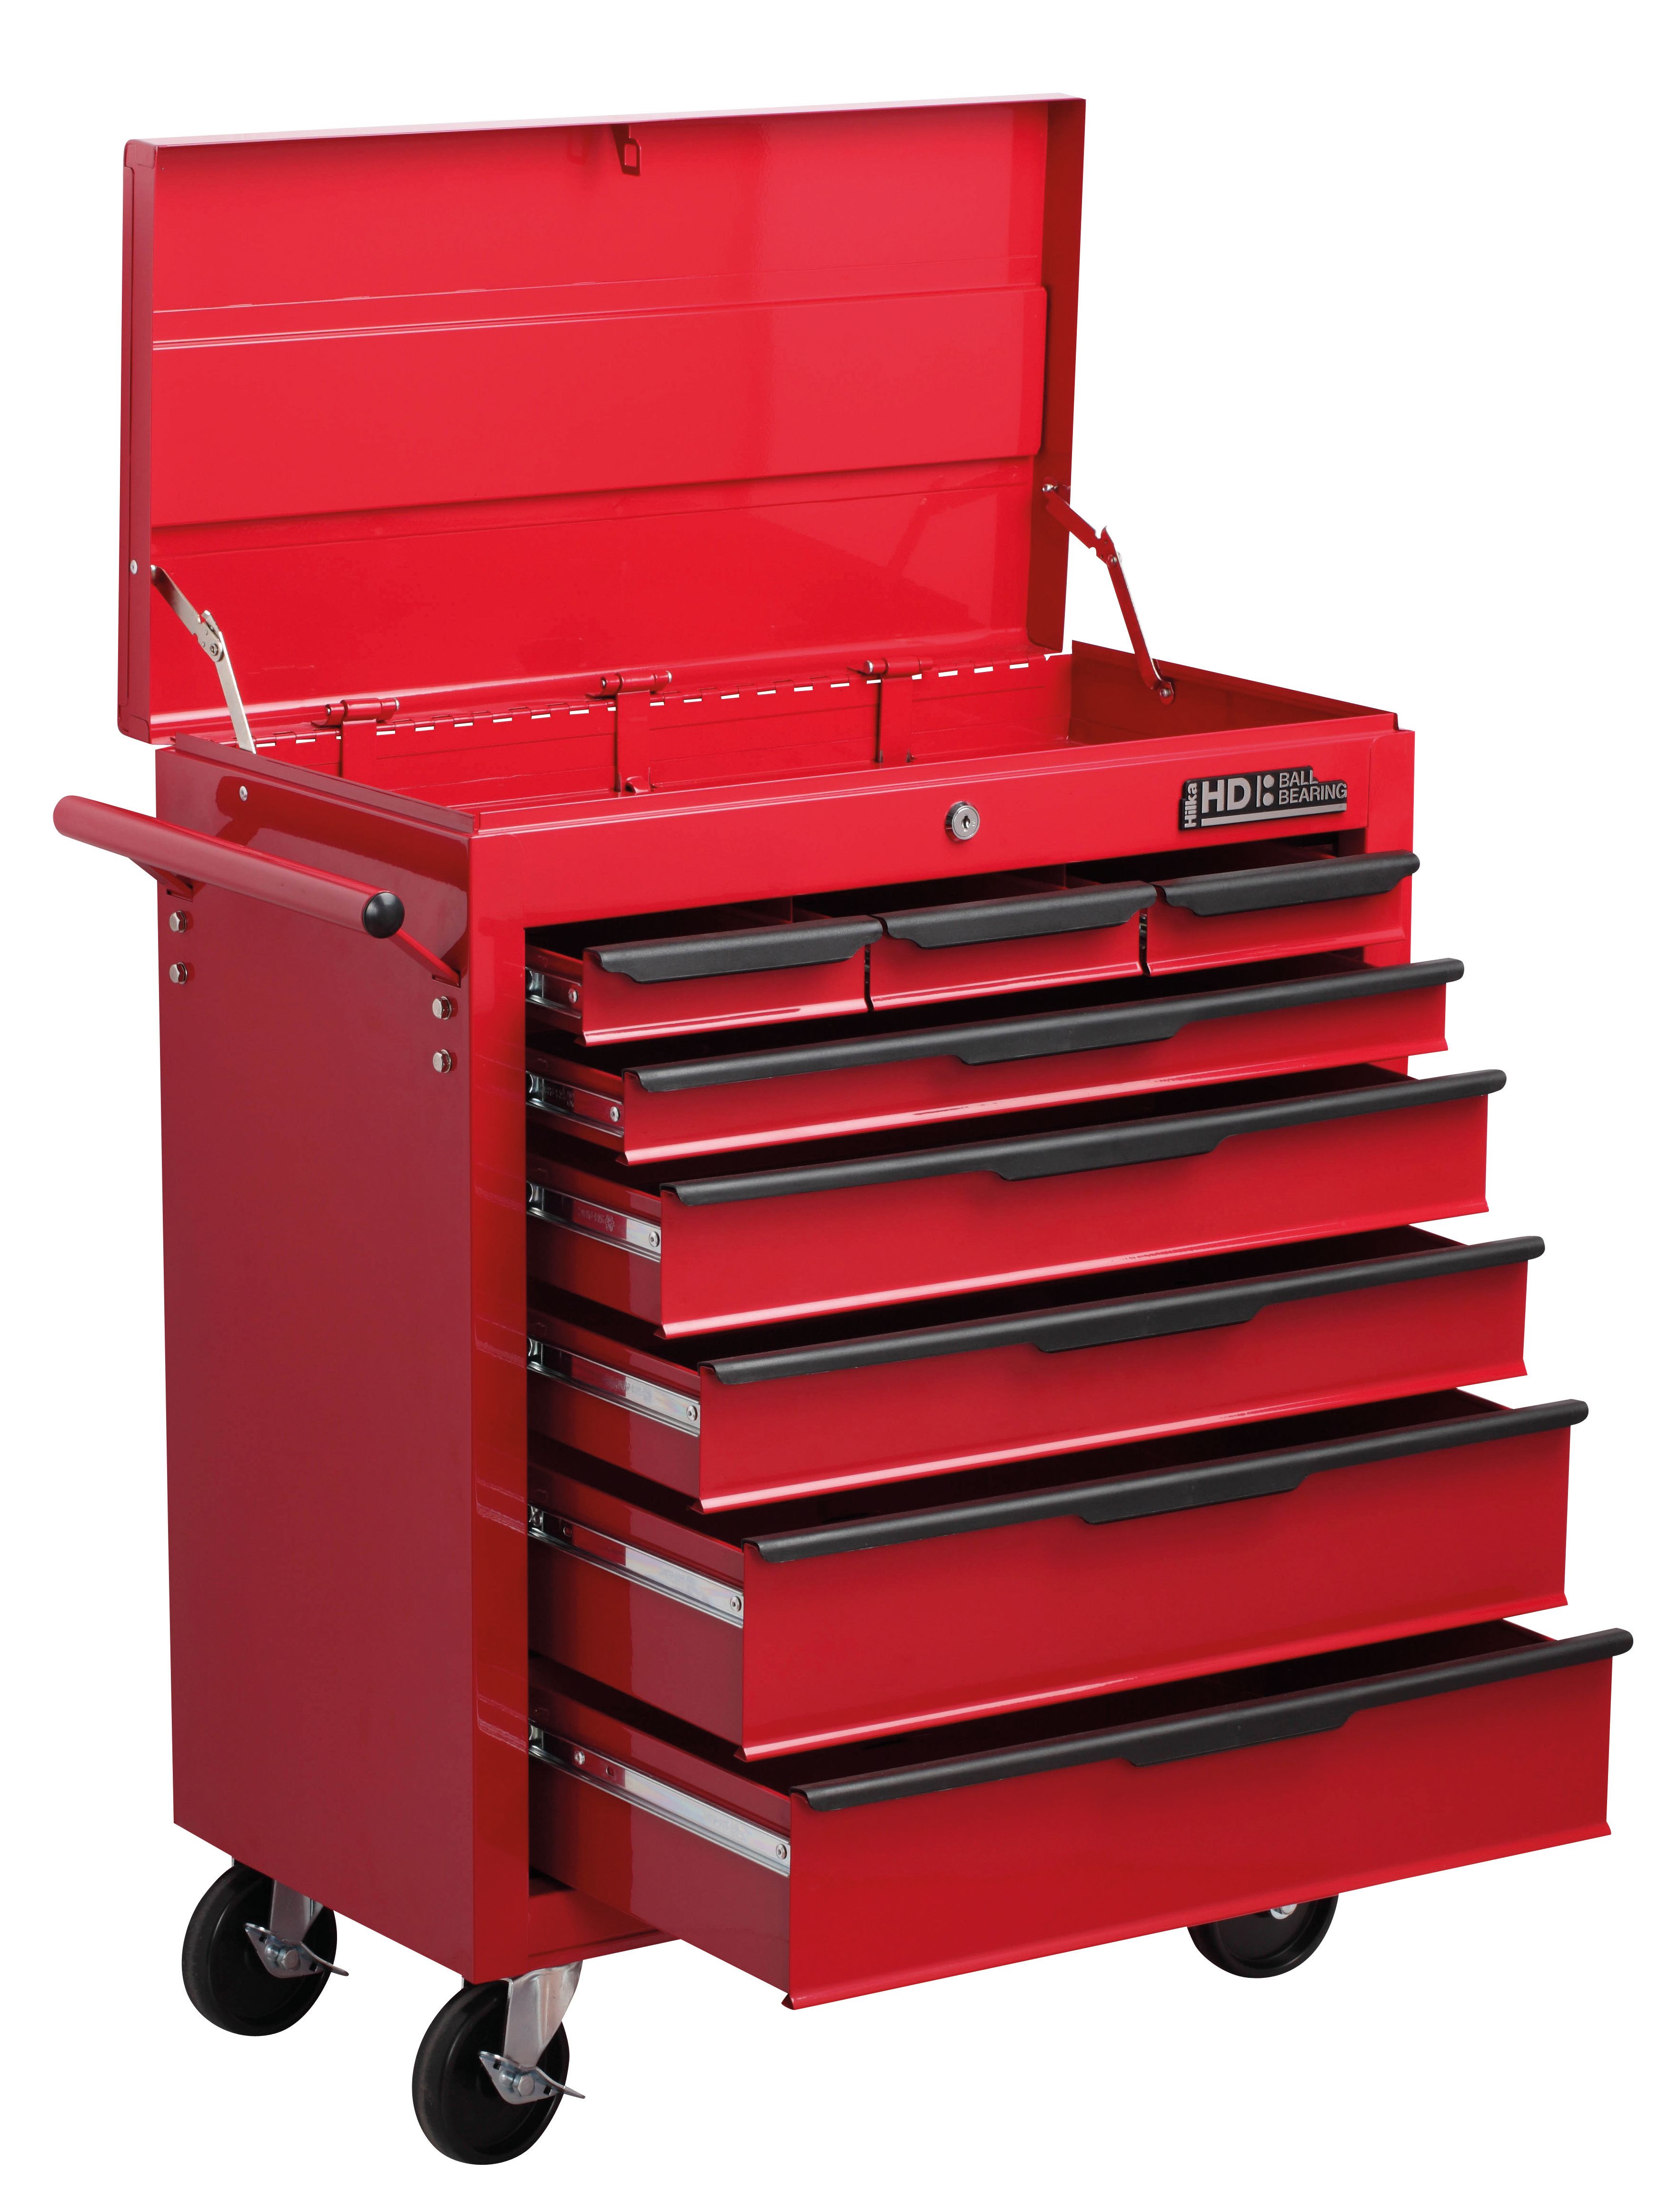 Hilka Heavy Duty 8 Drawer Tool Trolley with Lid - Red